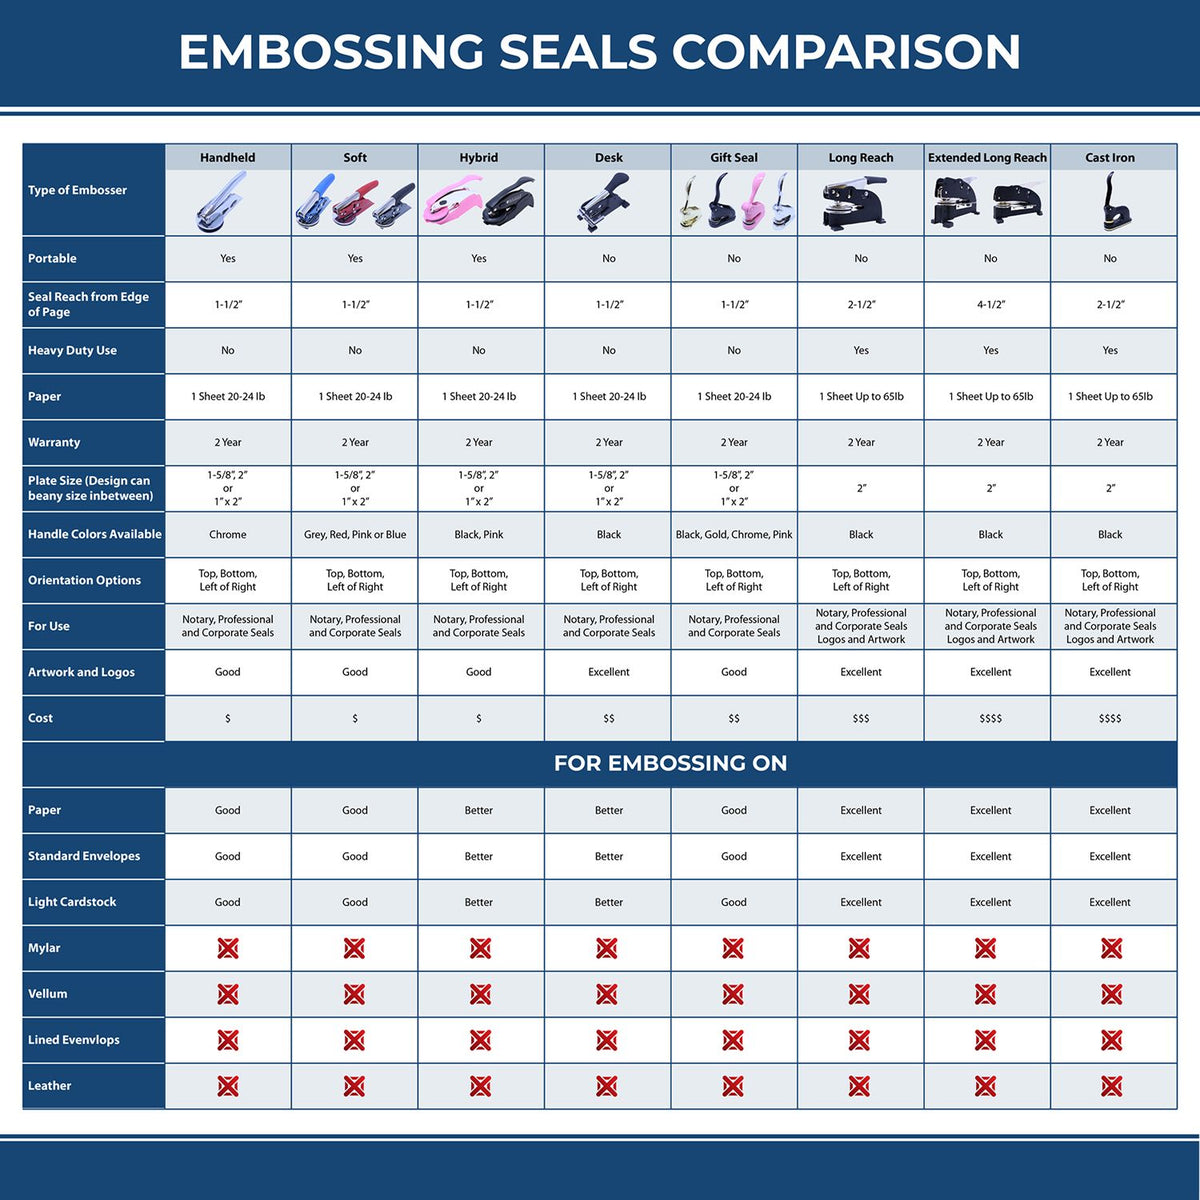 A comparison chart for the different types of mount models available for the Hybrid Missouri Geologist Seal